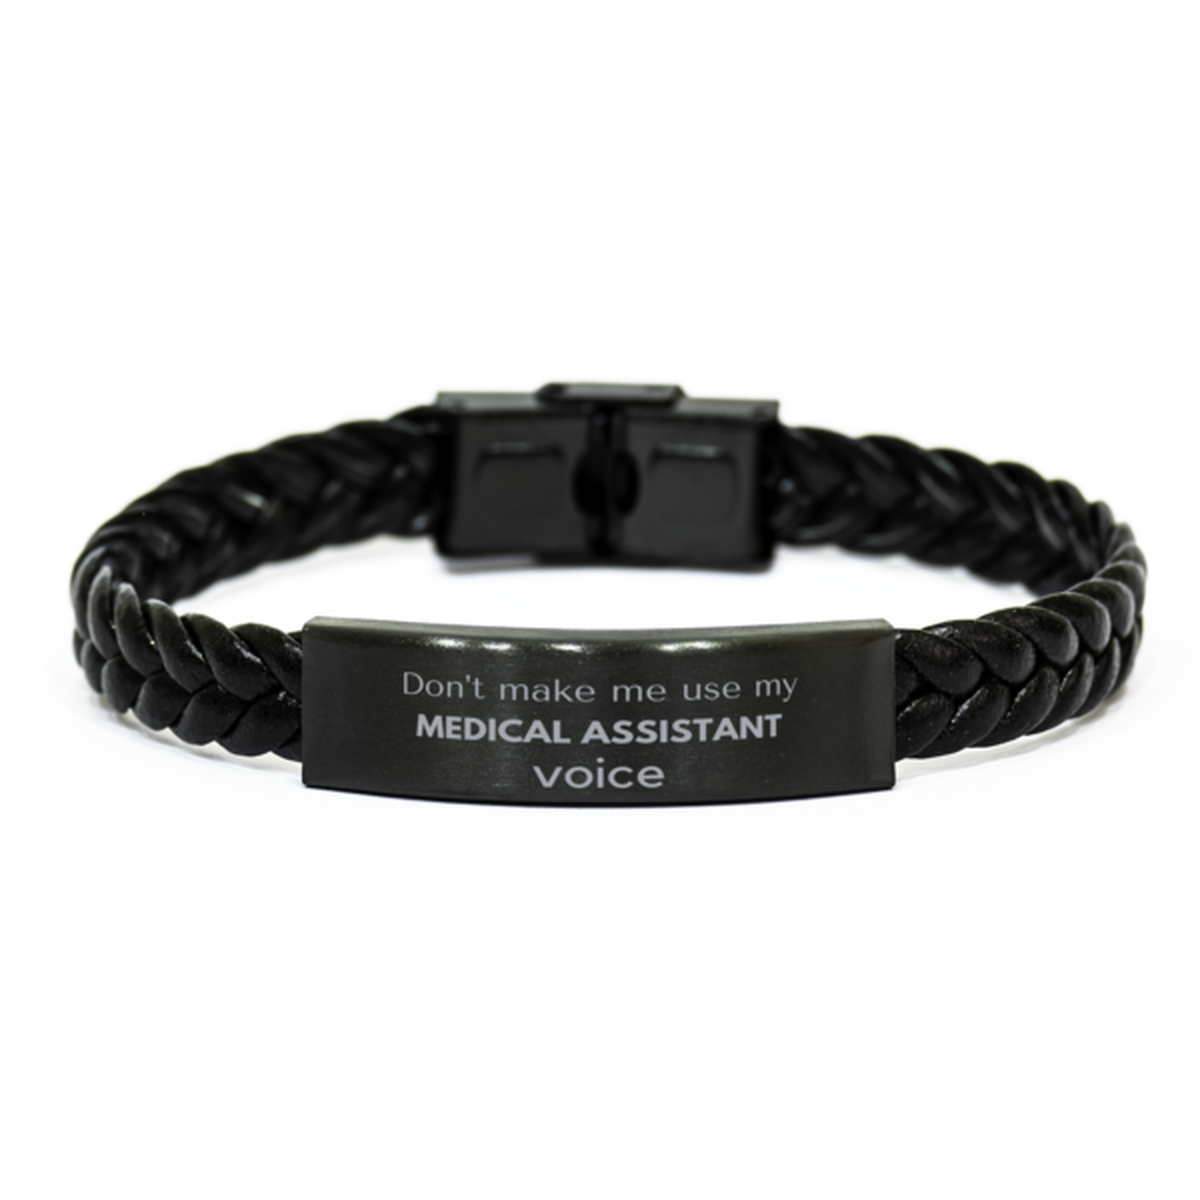 Don't make me use my Medical Assistant voice, Sarcasm Medical Assistant Gifts, Christmas Medical Assistant Braided Leather Bracelet Birthday Unique Gifts For Medical Assistant Coworkers, Men, Women, Colleague, Friends